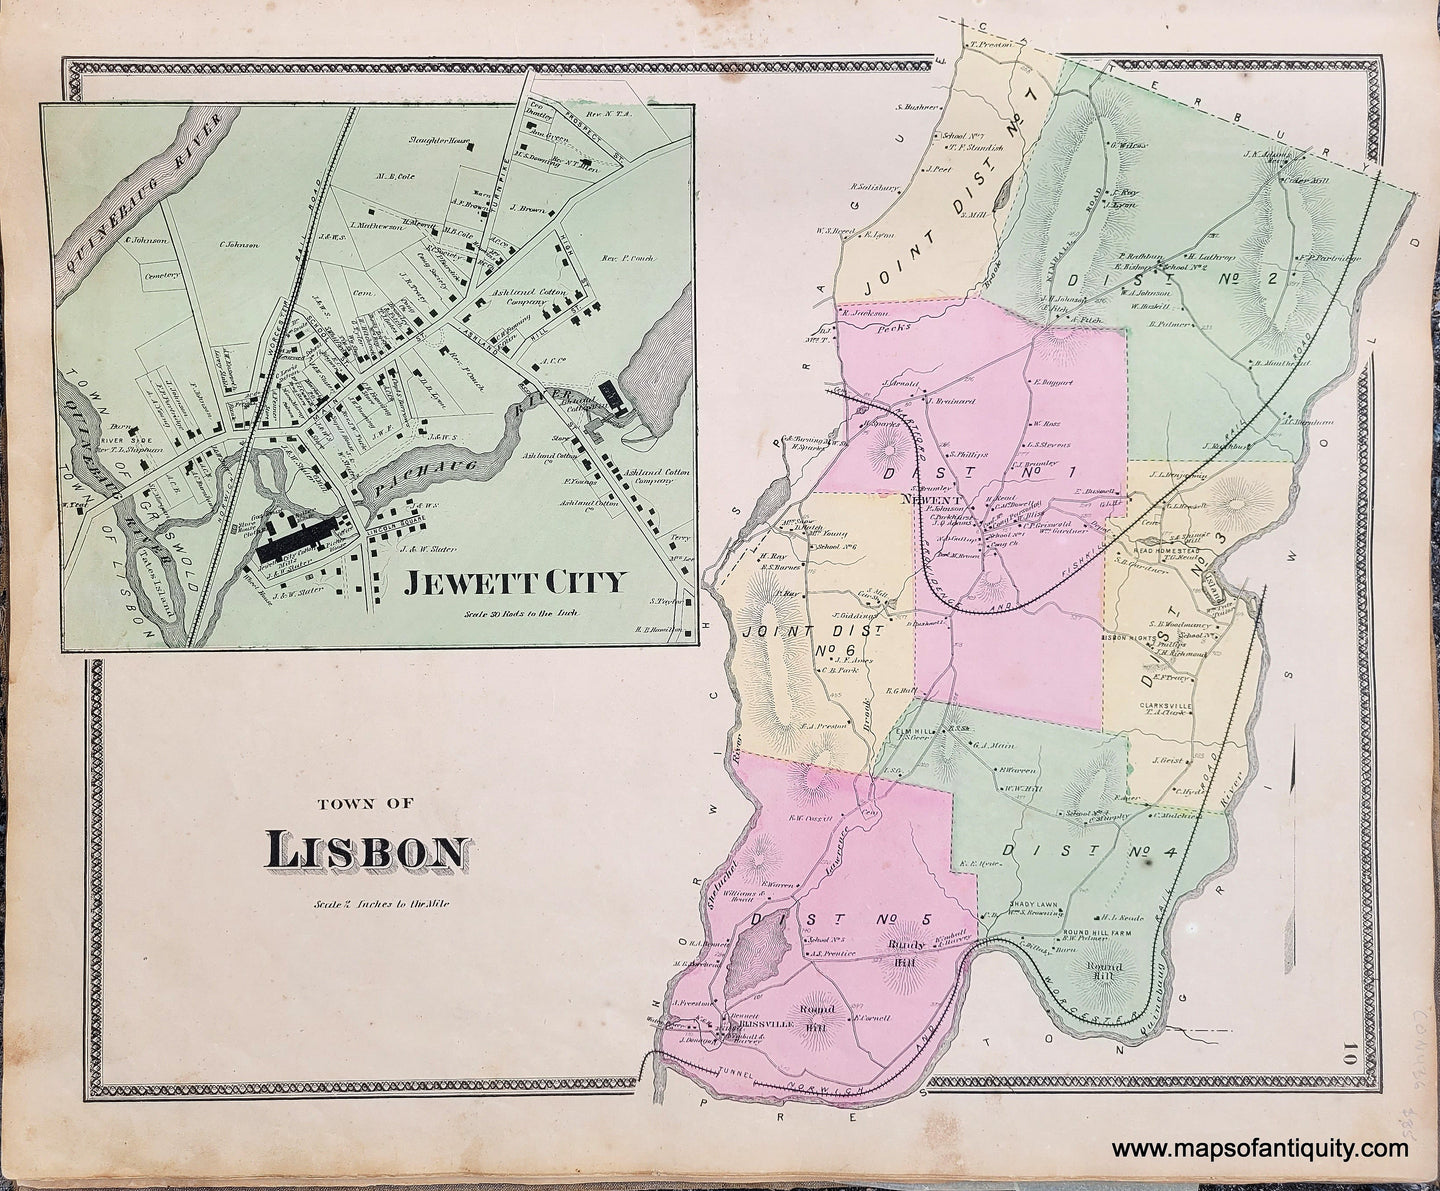 Genuine-Antique-Hand-Colored-Map-Town-of-Lisbon-CT--1868-Beers-Ellis-Soule--Maps-Of-Antiquity